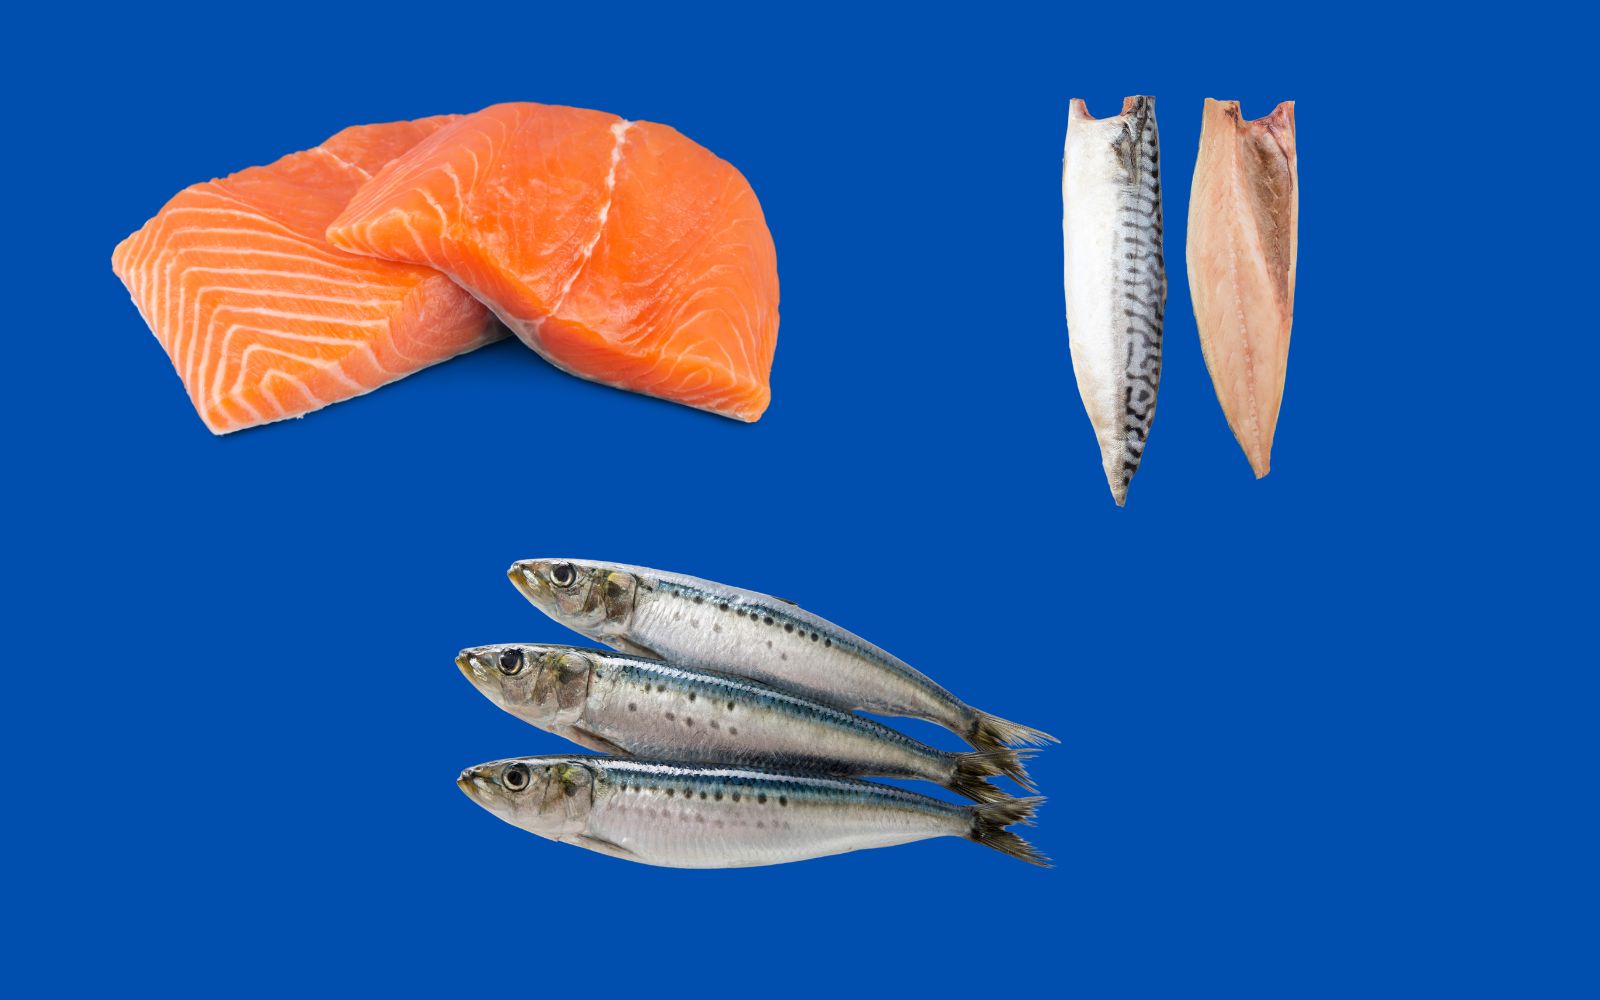 Examples of fatty fish